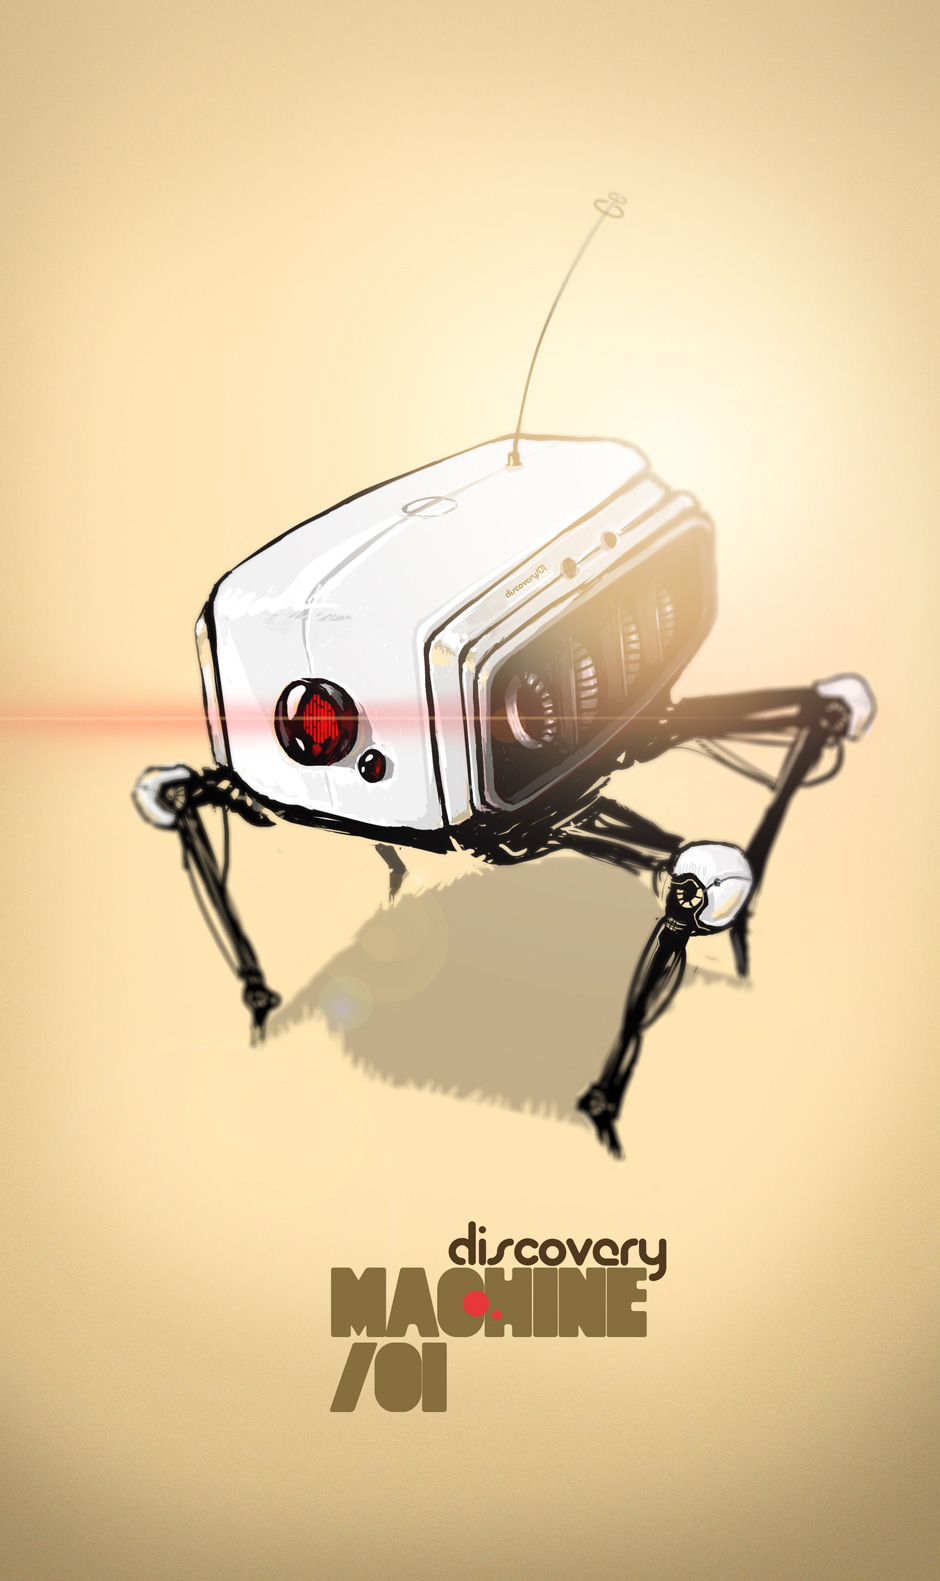 robot photoshop Illustrator illustrations sketch draw colors mouse mummy paint bee poster droid machine wacom